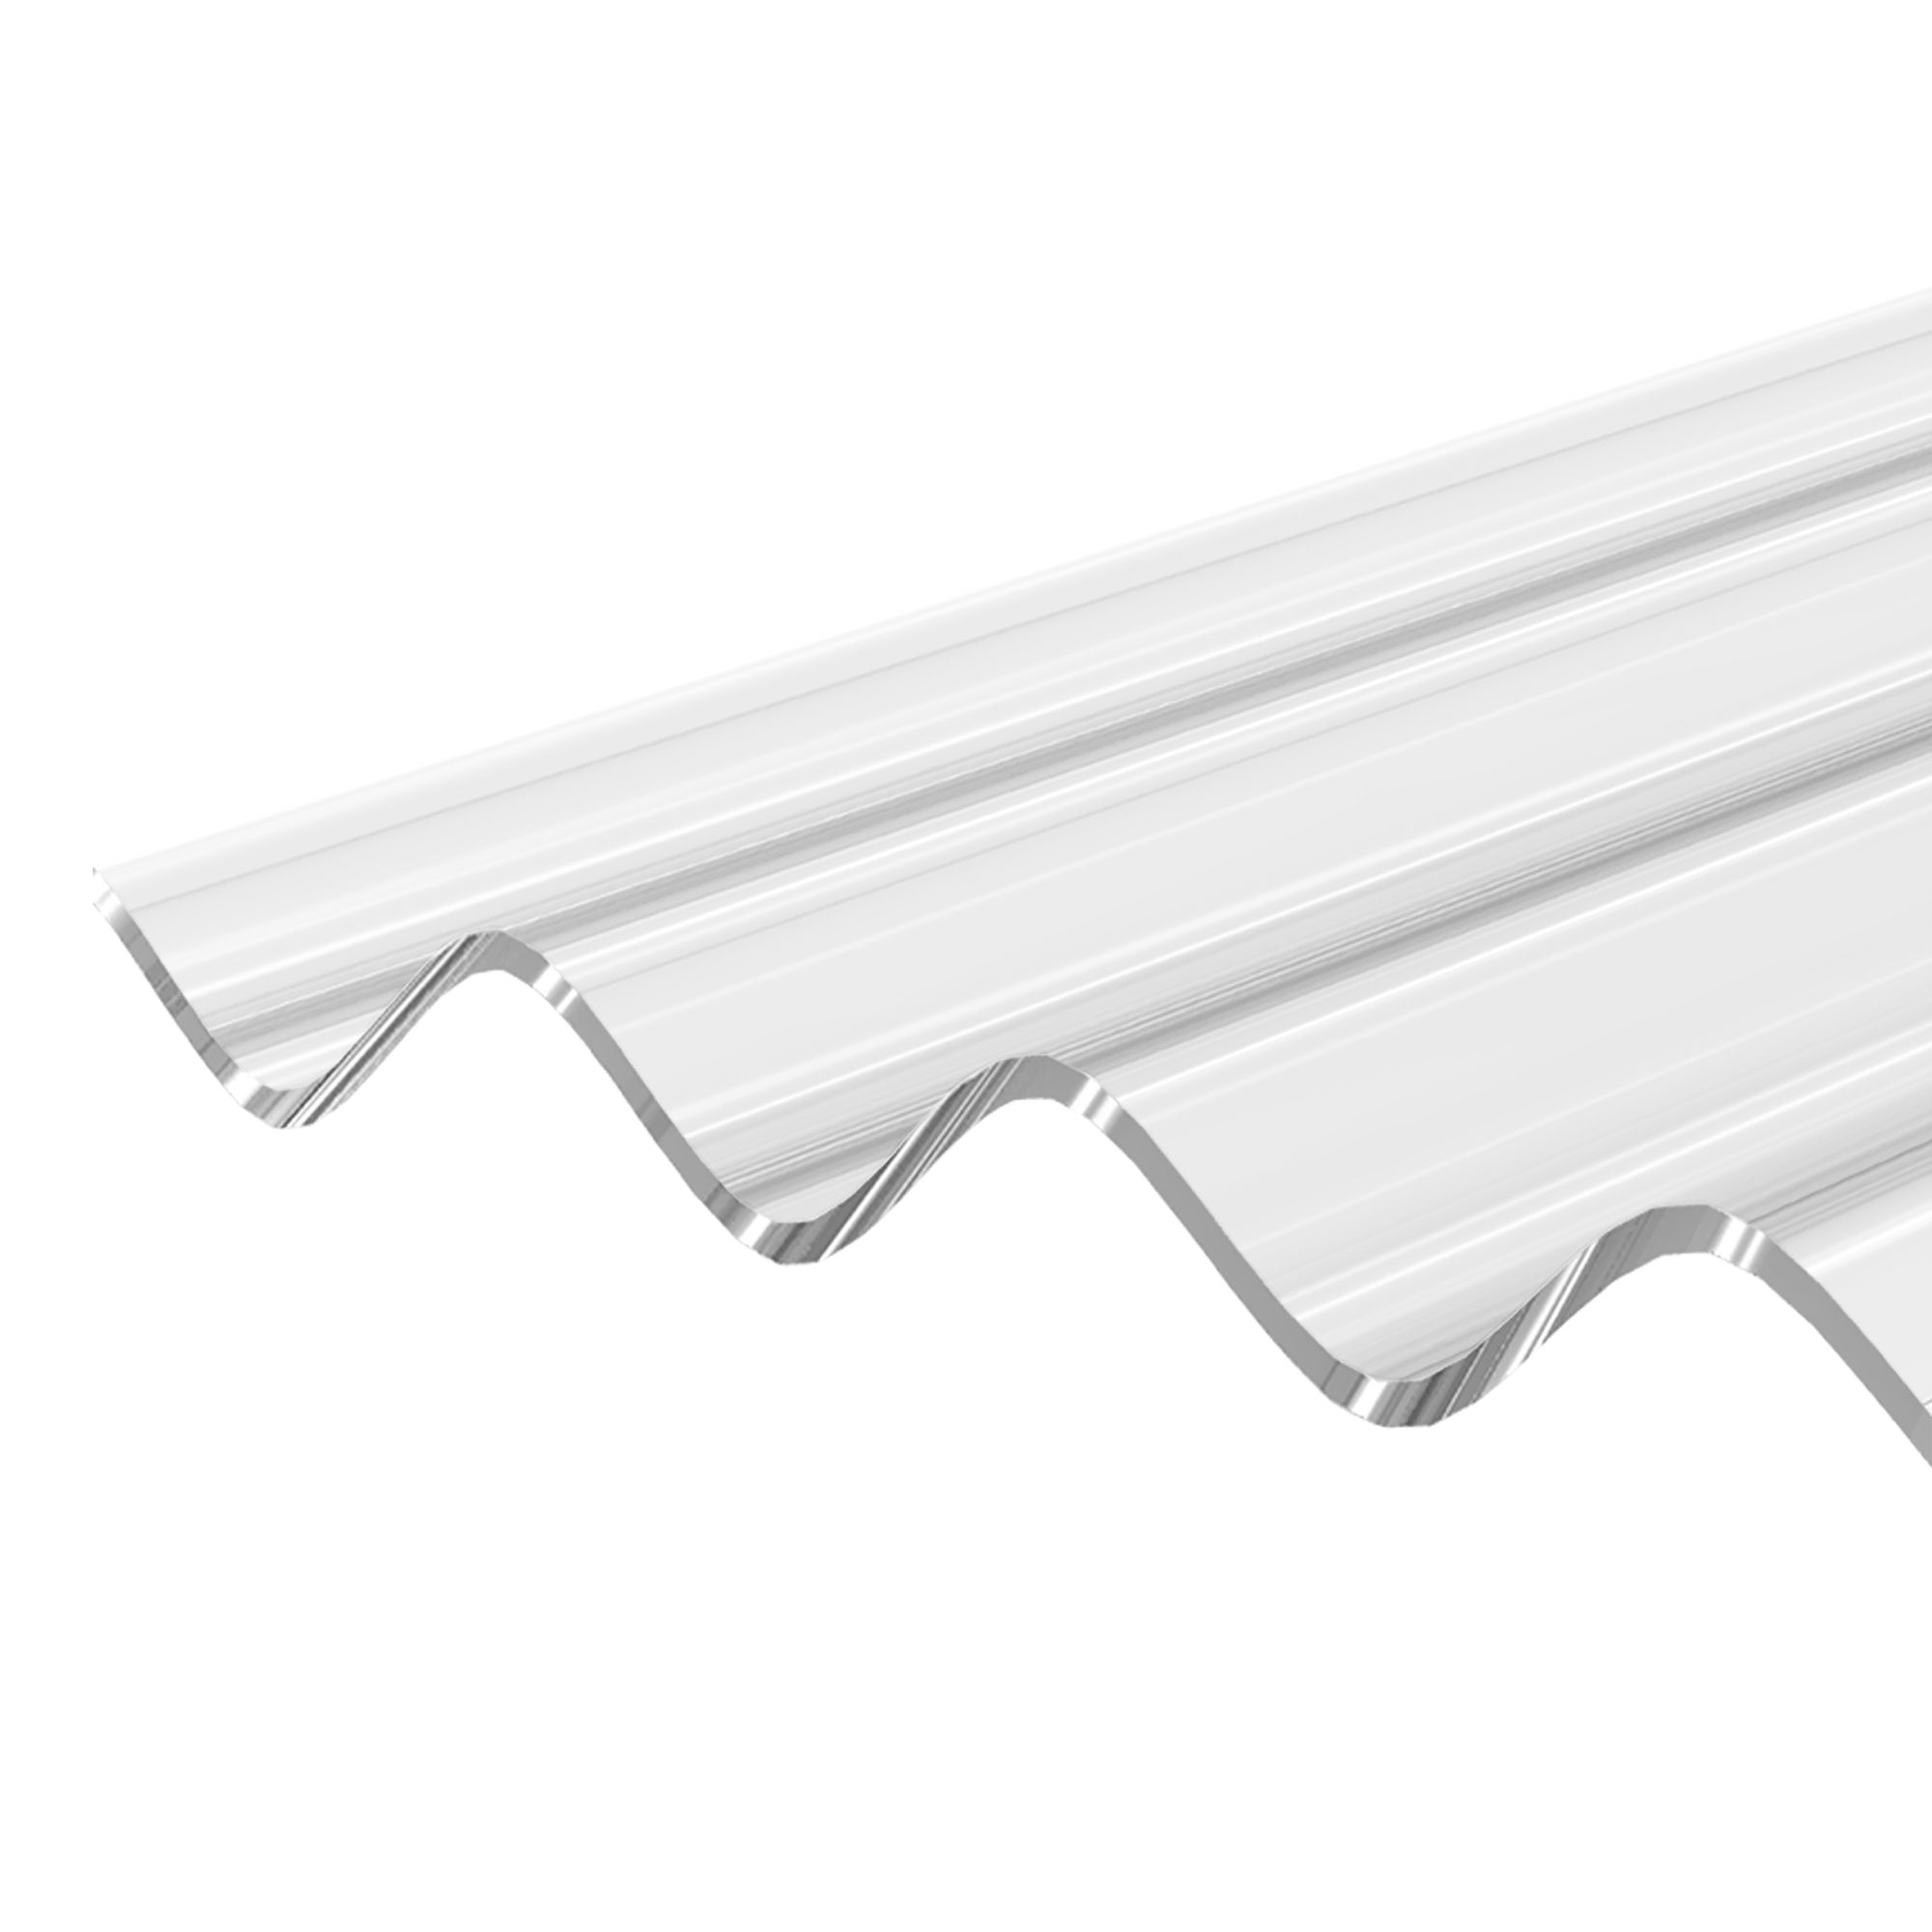 Corrapol Clear Polycarbonate Corrugated Roofing Sheet L 3m W 950mm T 1mm Diy At B Q